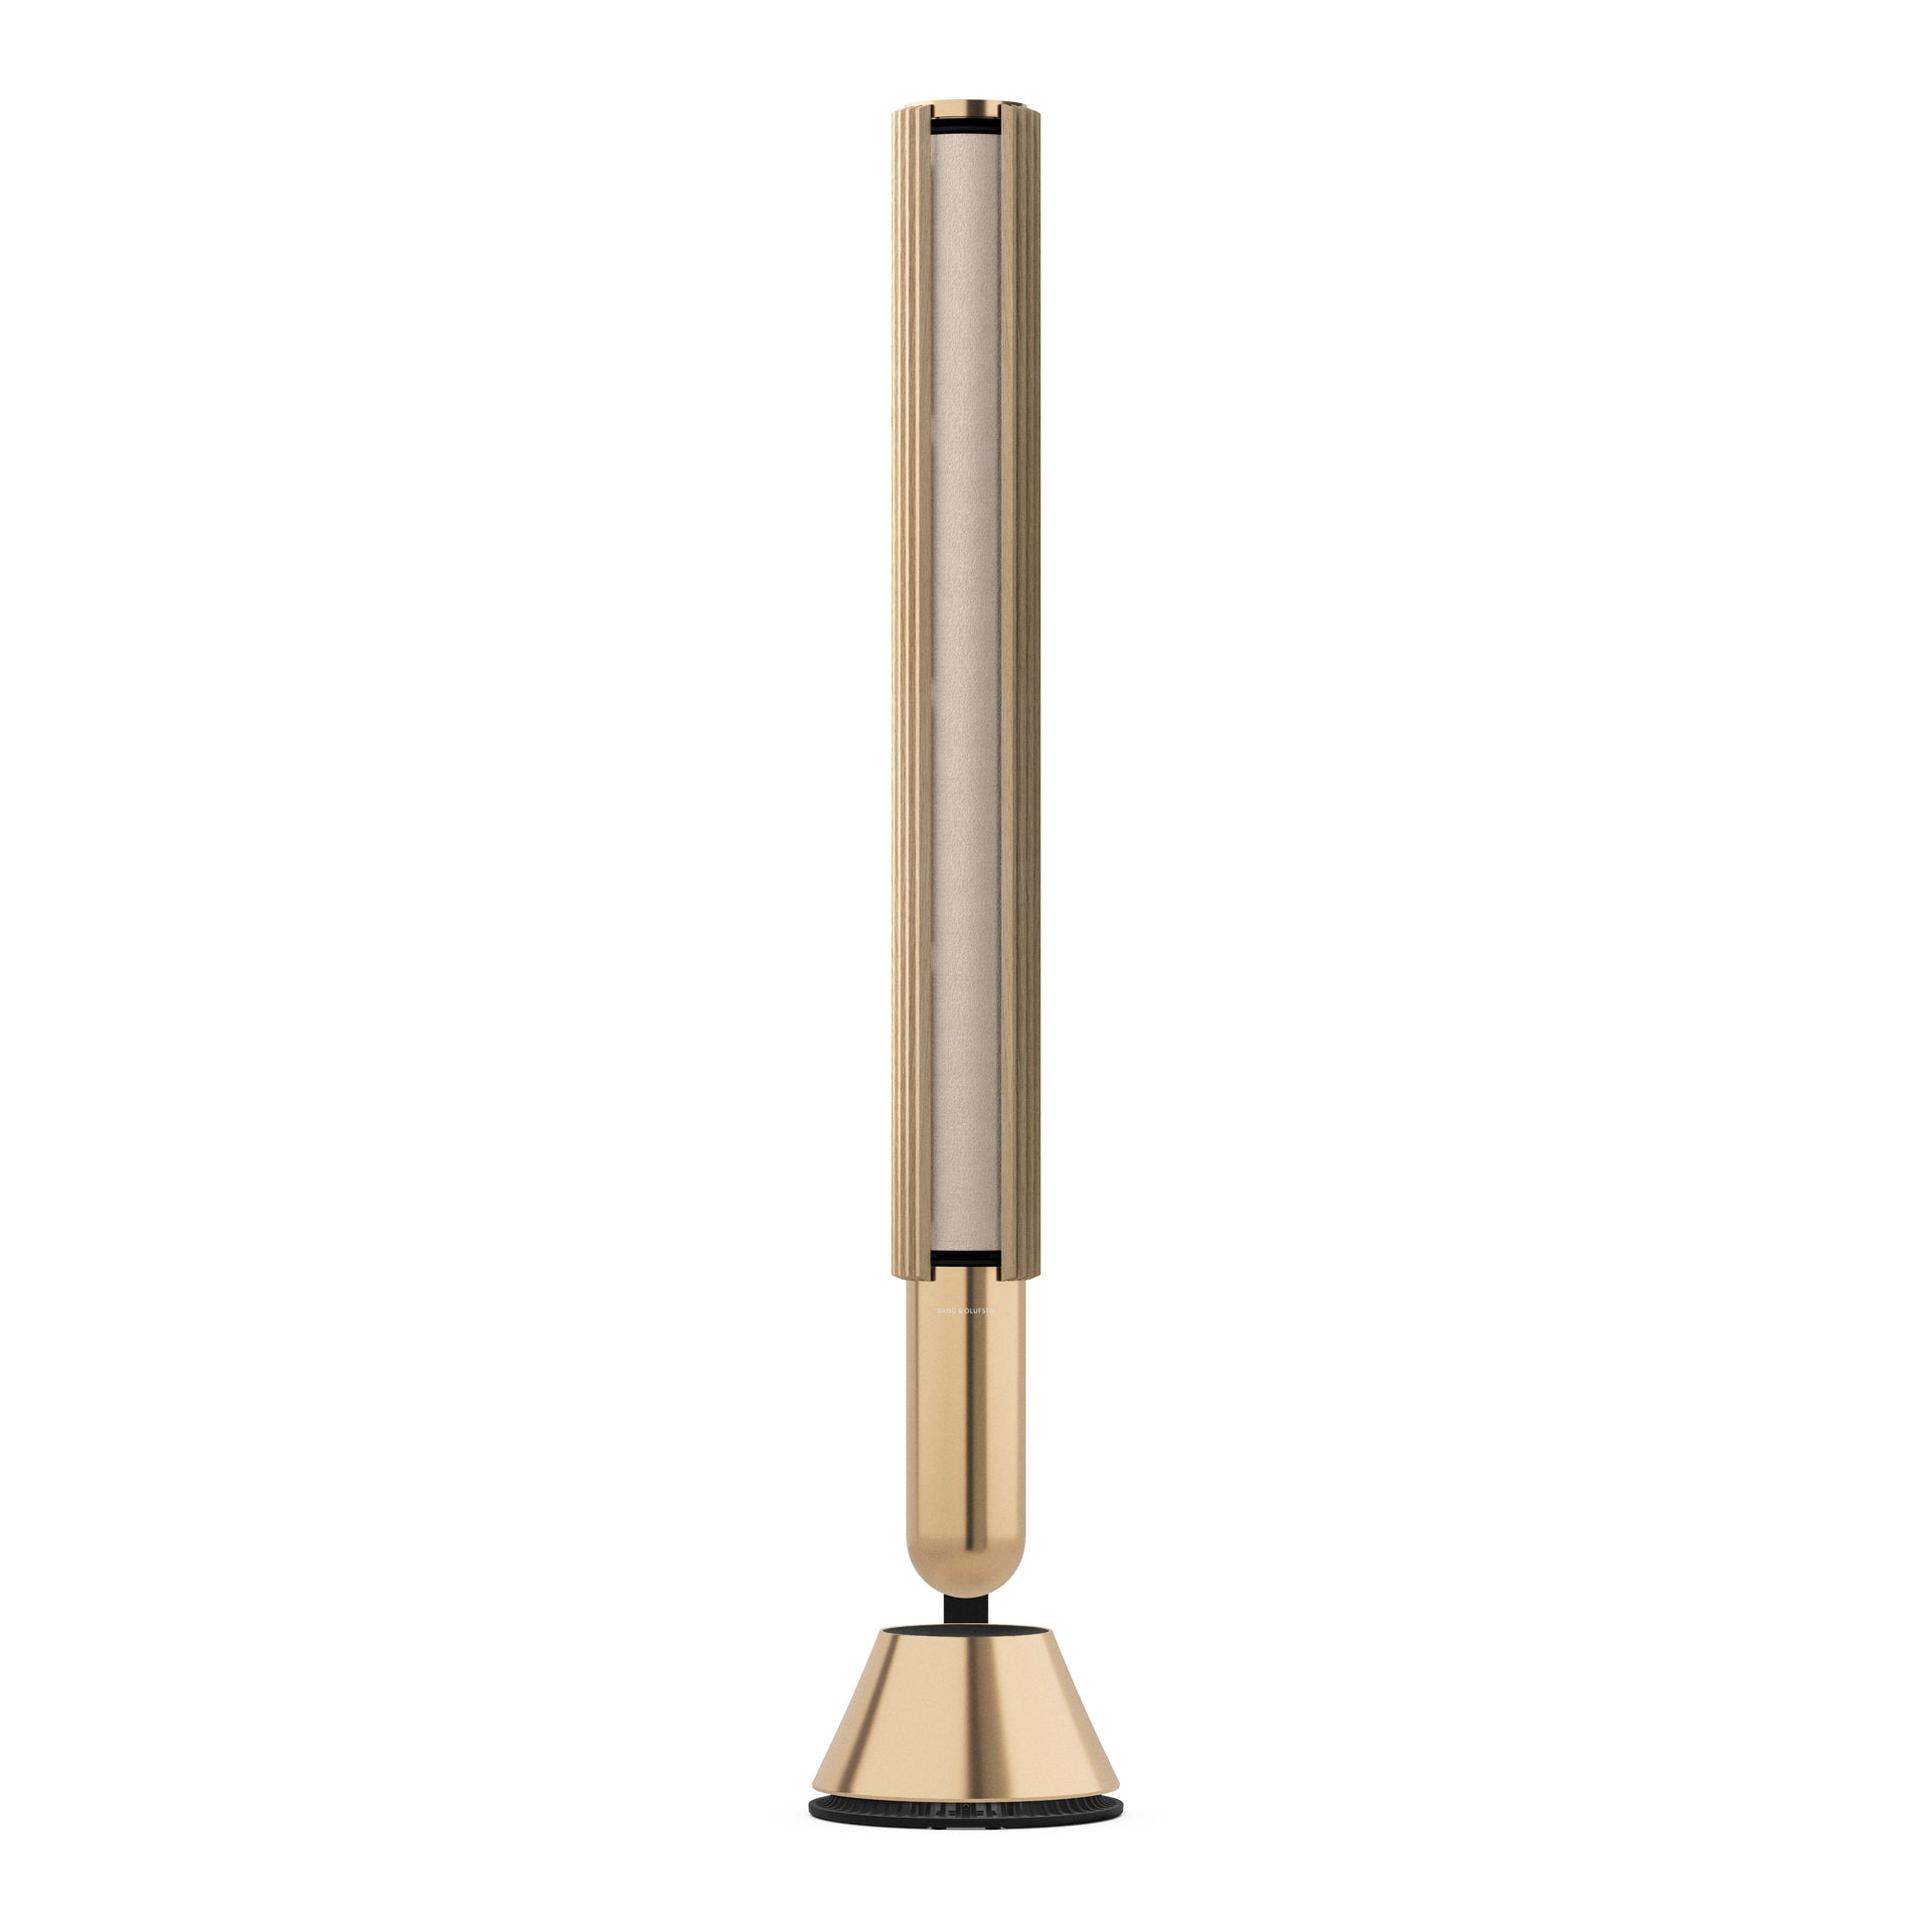 BeoLab 28 in Gold - bodenstehend